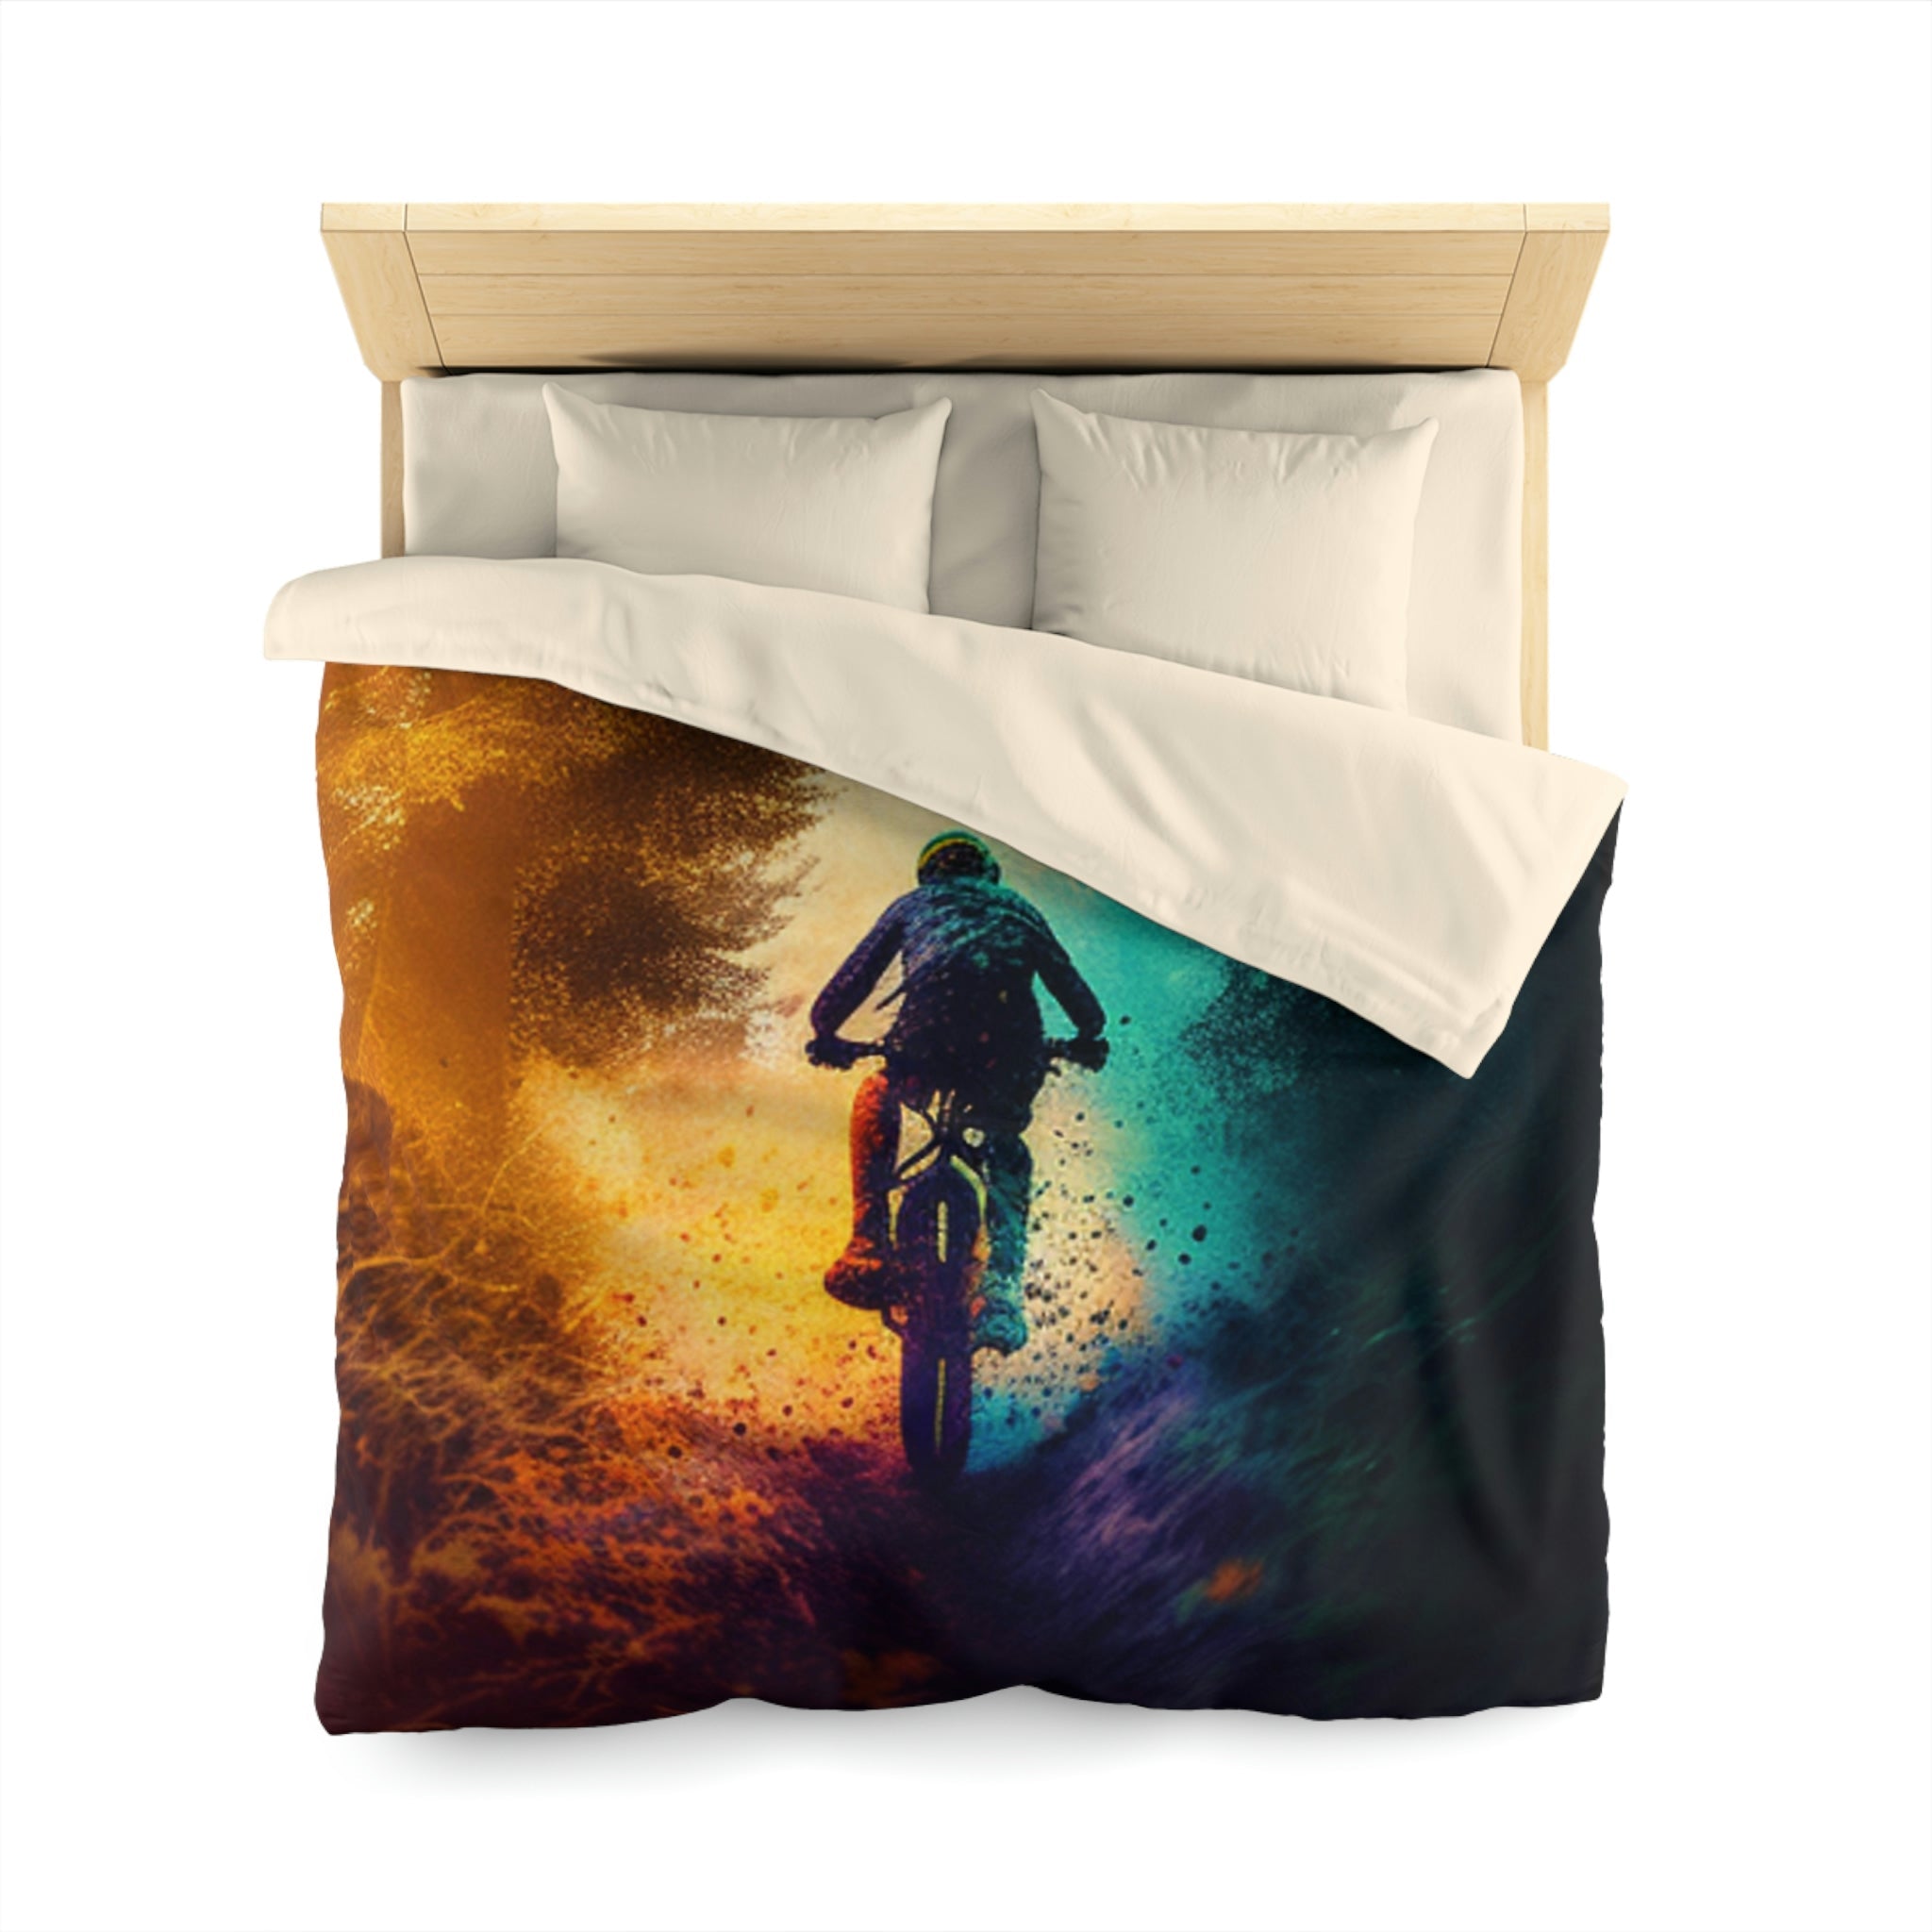 QUILT COVER | MOUNTAIN BIKER IN FOREST | 3 SIZES - Single Track Dreamer